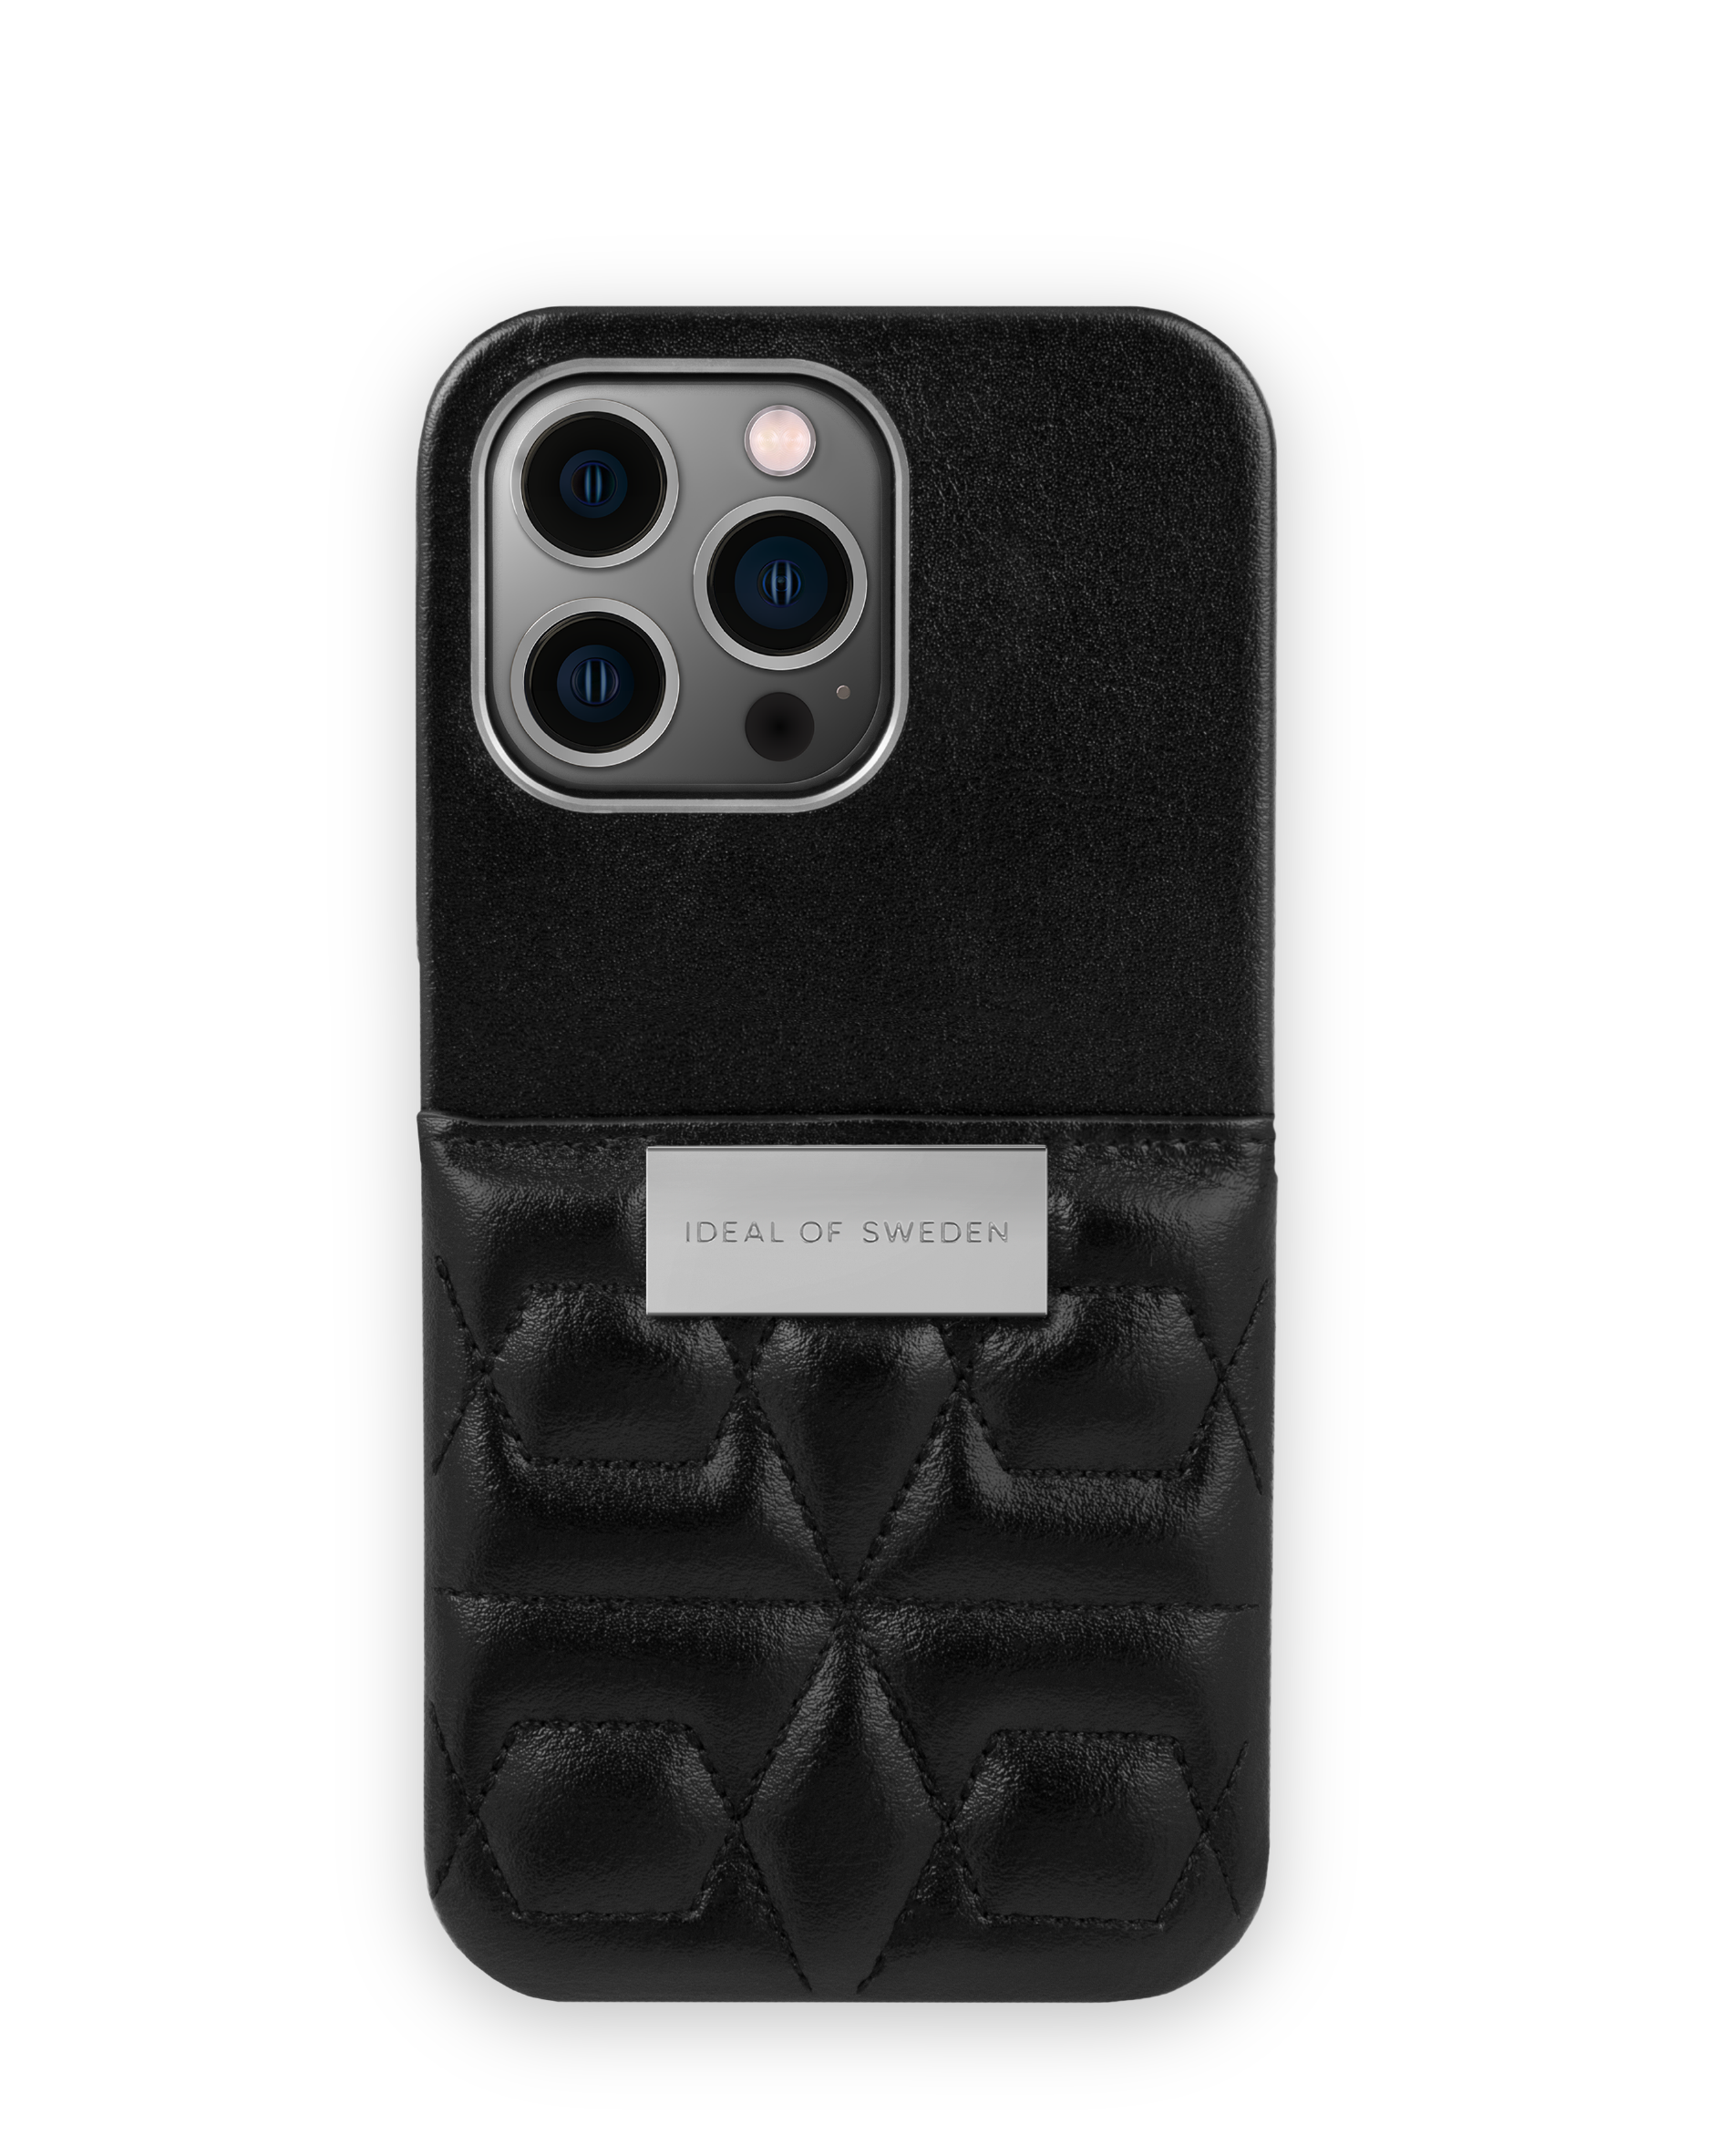 Charcoal iPhone Backcover, SWEDEN Pro, Black 13 IDACSS22-I2161P-403, OF Apple, IDEAL